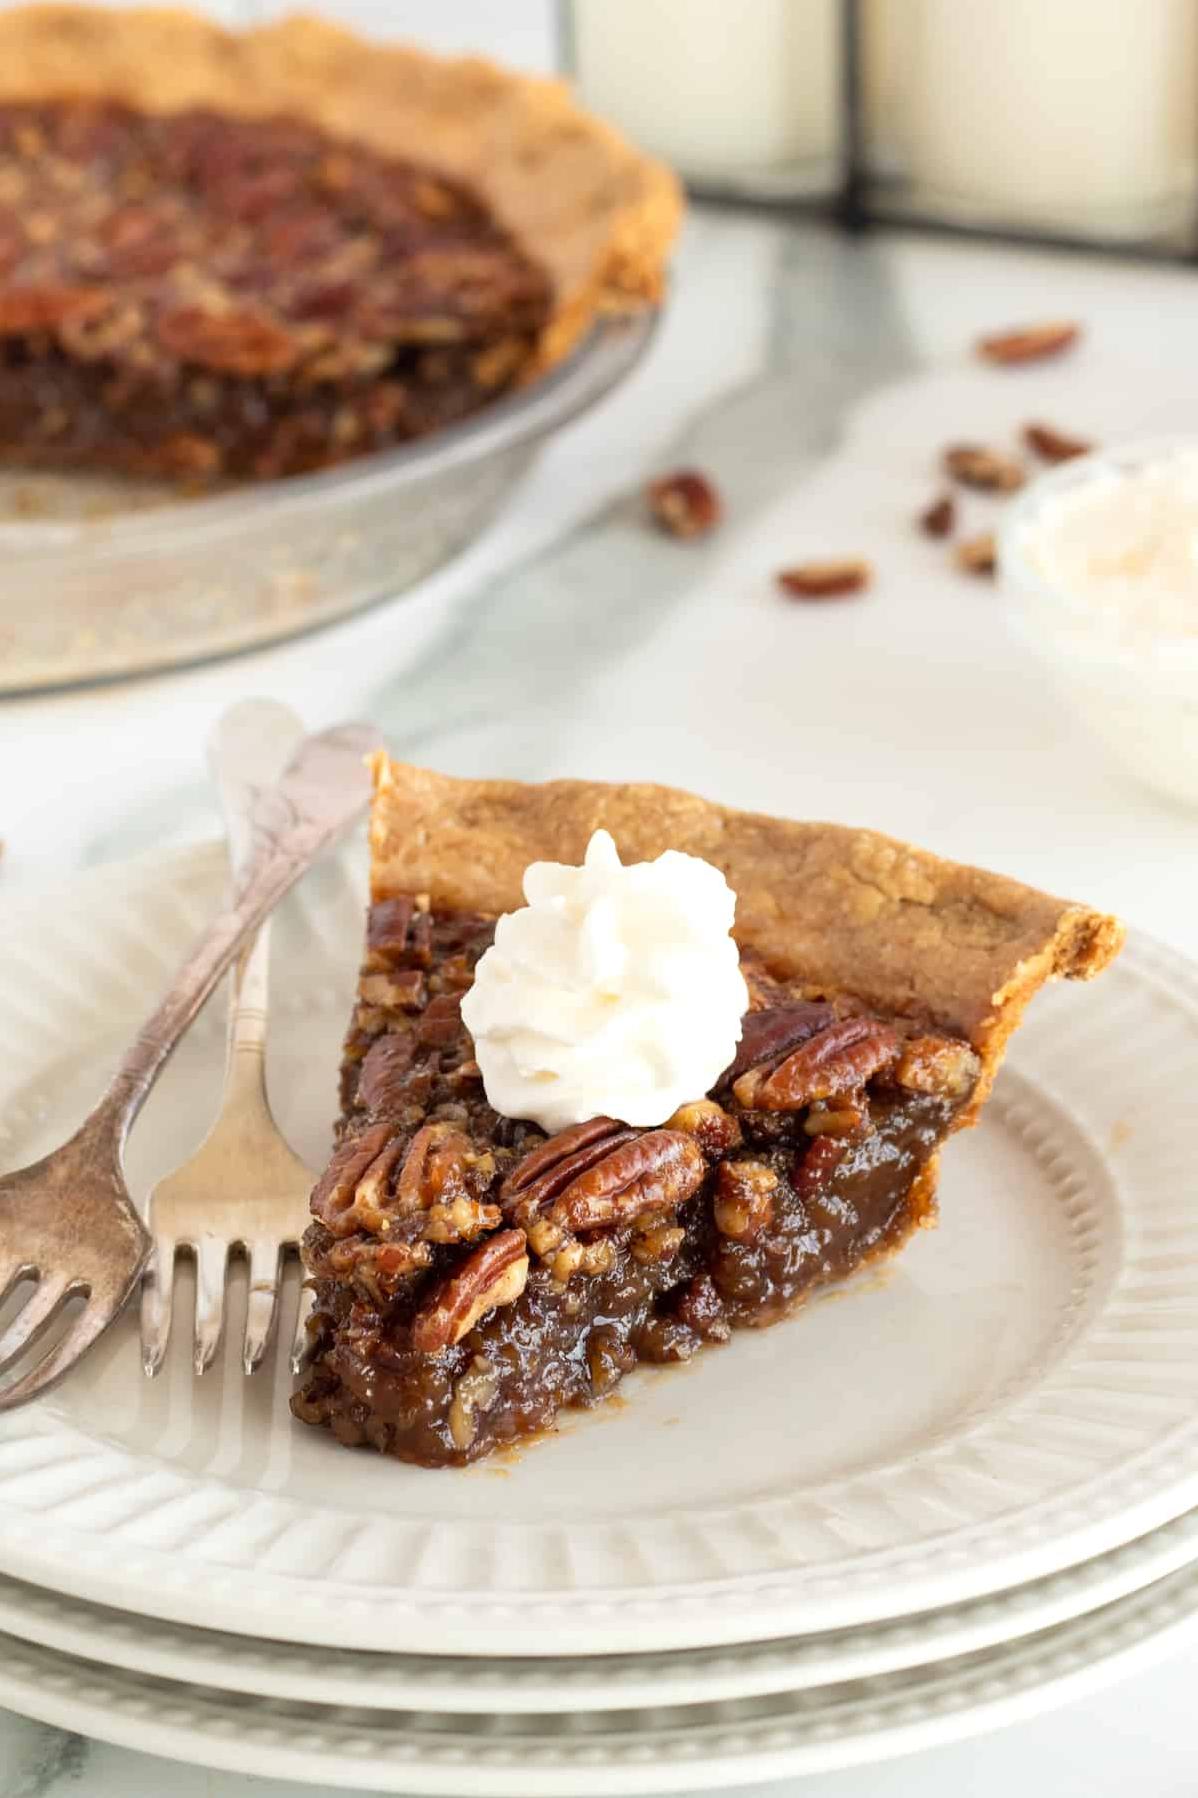  A Golden Crust and Rich Filling: Our Family's Favorite Pecan Pie